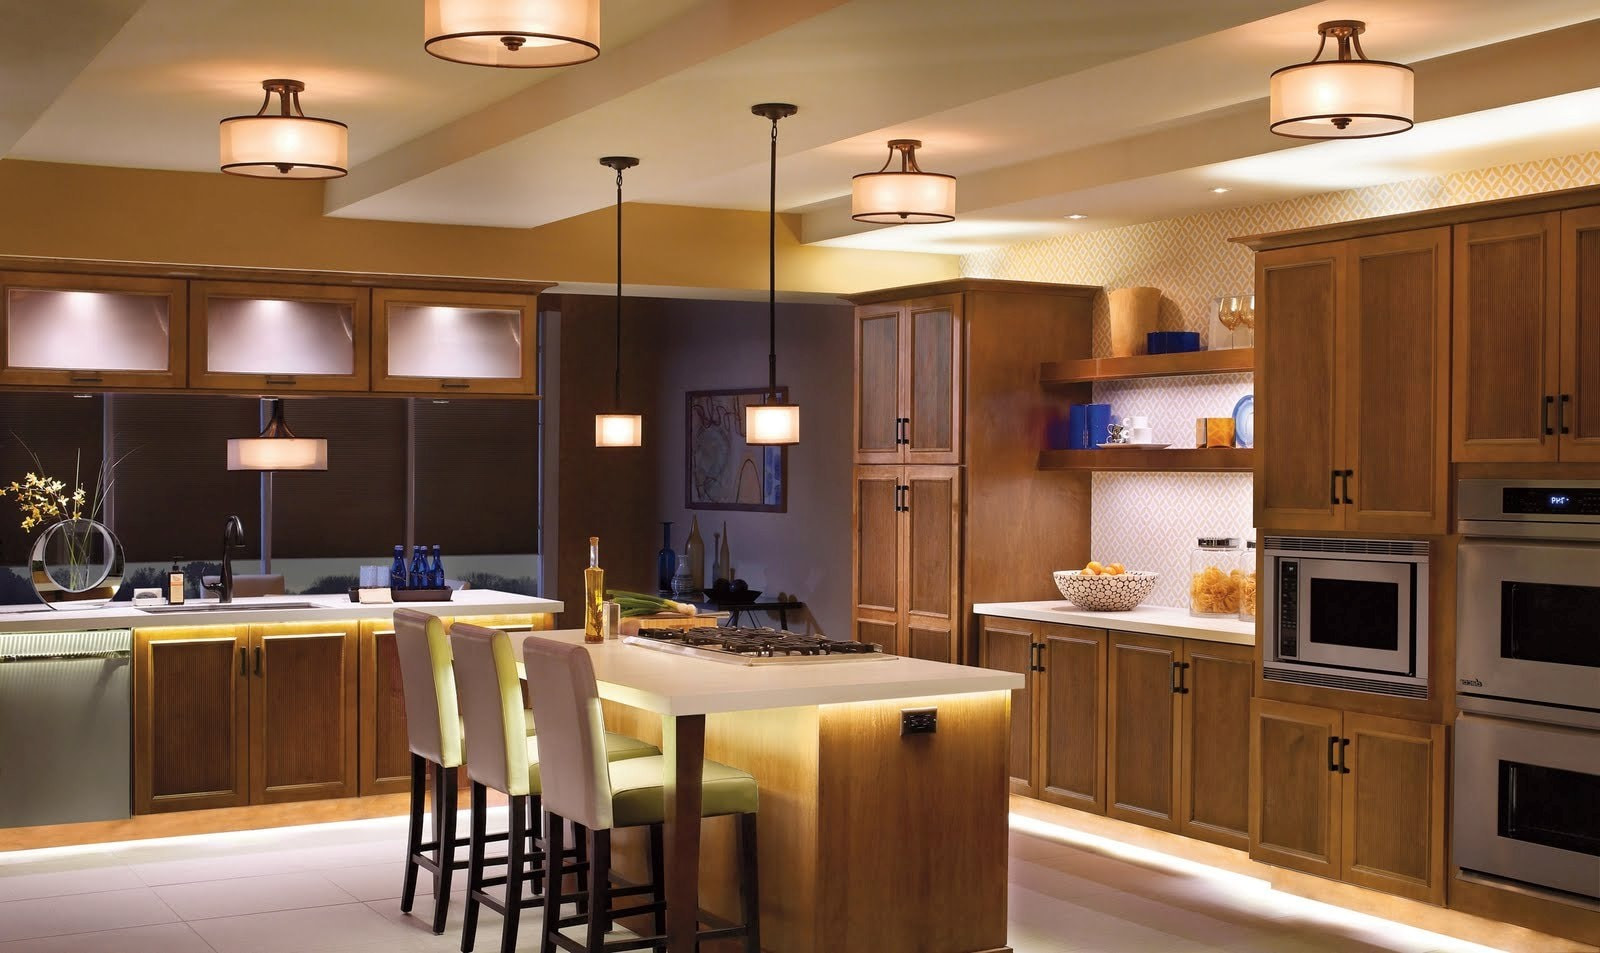 Ceiling Kitchen Lights
 7 cool ways to add color to your kitchen Bonito Designs